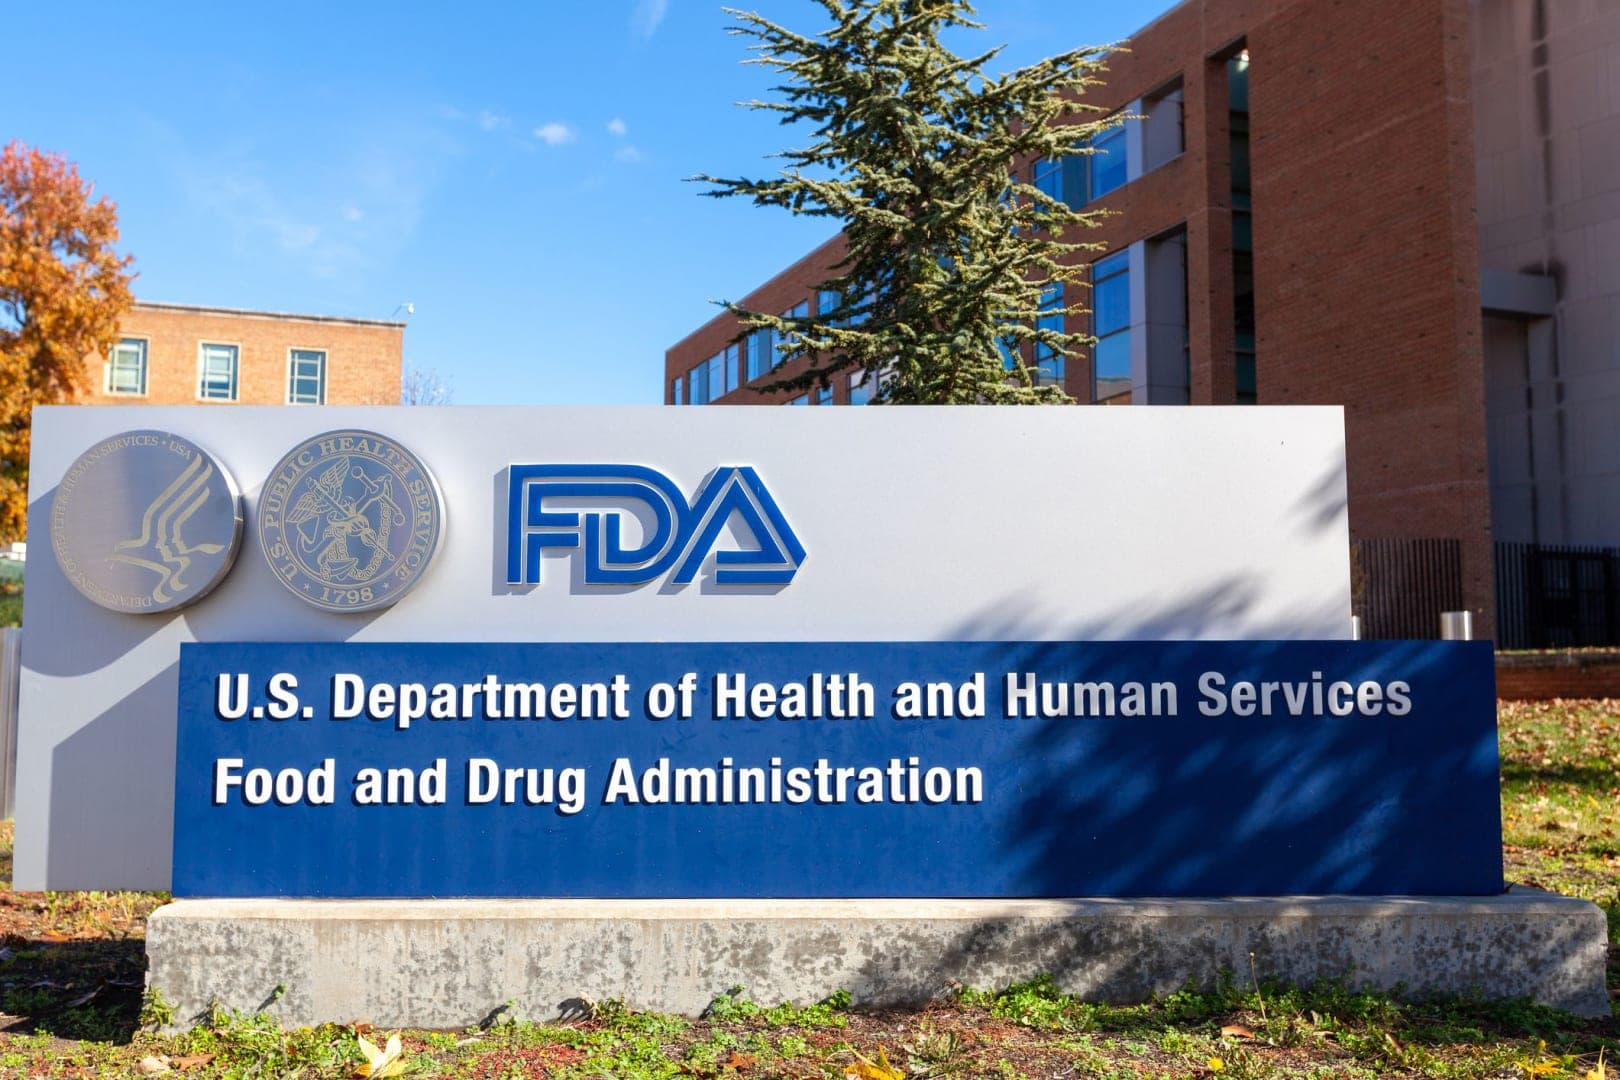 BREAKING: Israeli physicians, scientists advise FDA of 'severe concerns' regarding reliability and legality of official Israeli COVID vaccine data